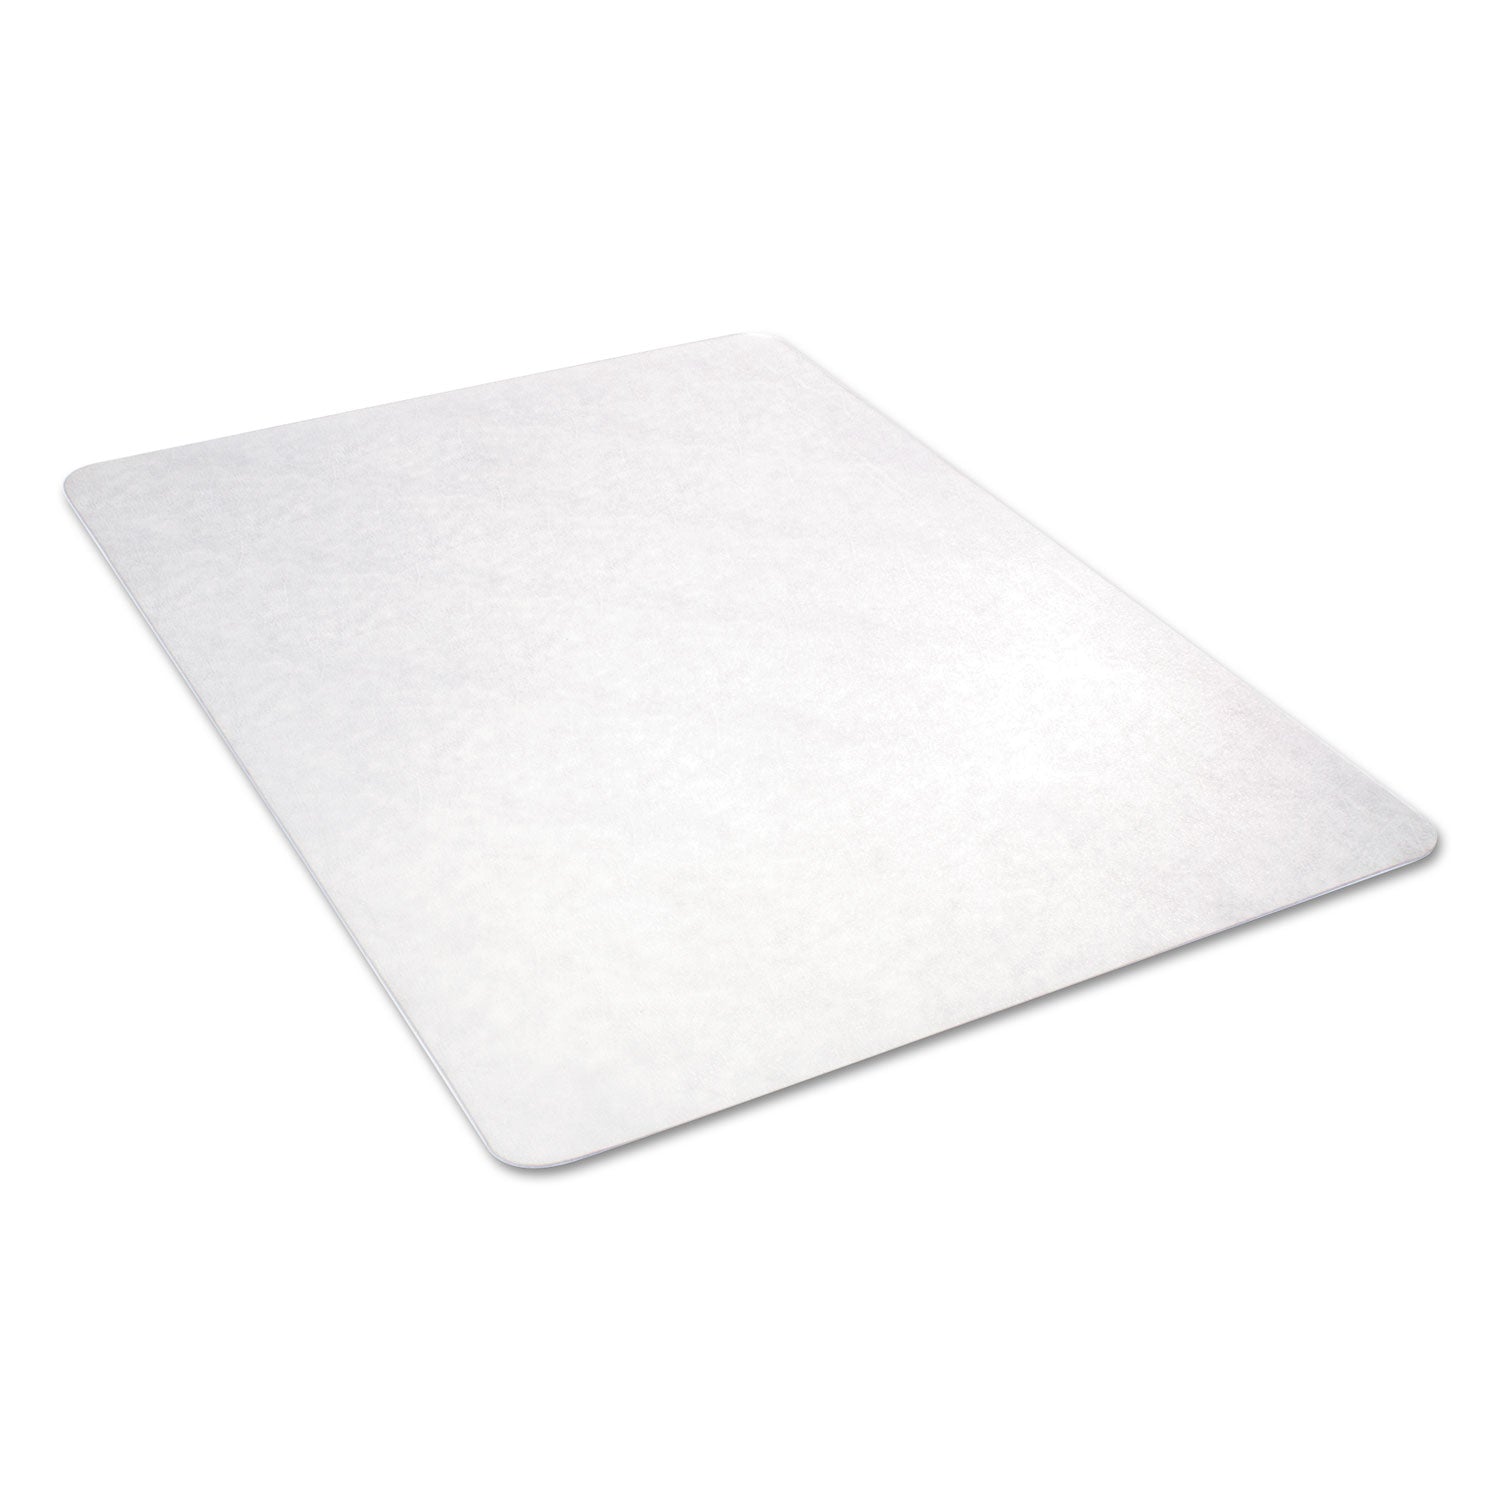 all-day-use-non-studded-chair-mat-for-hard-floors-46-x-60-rectangular-clear_alemat4660hfr - 6